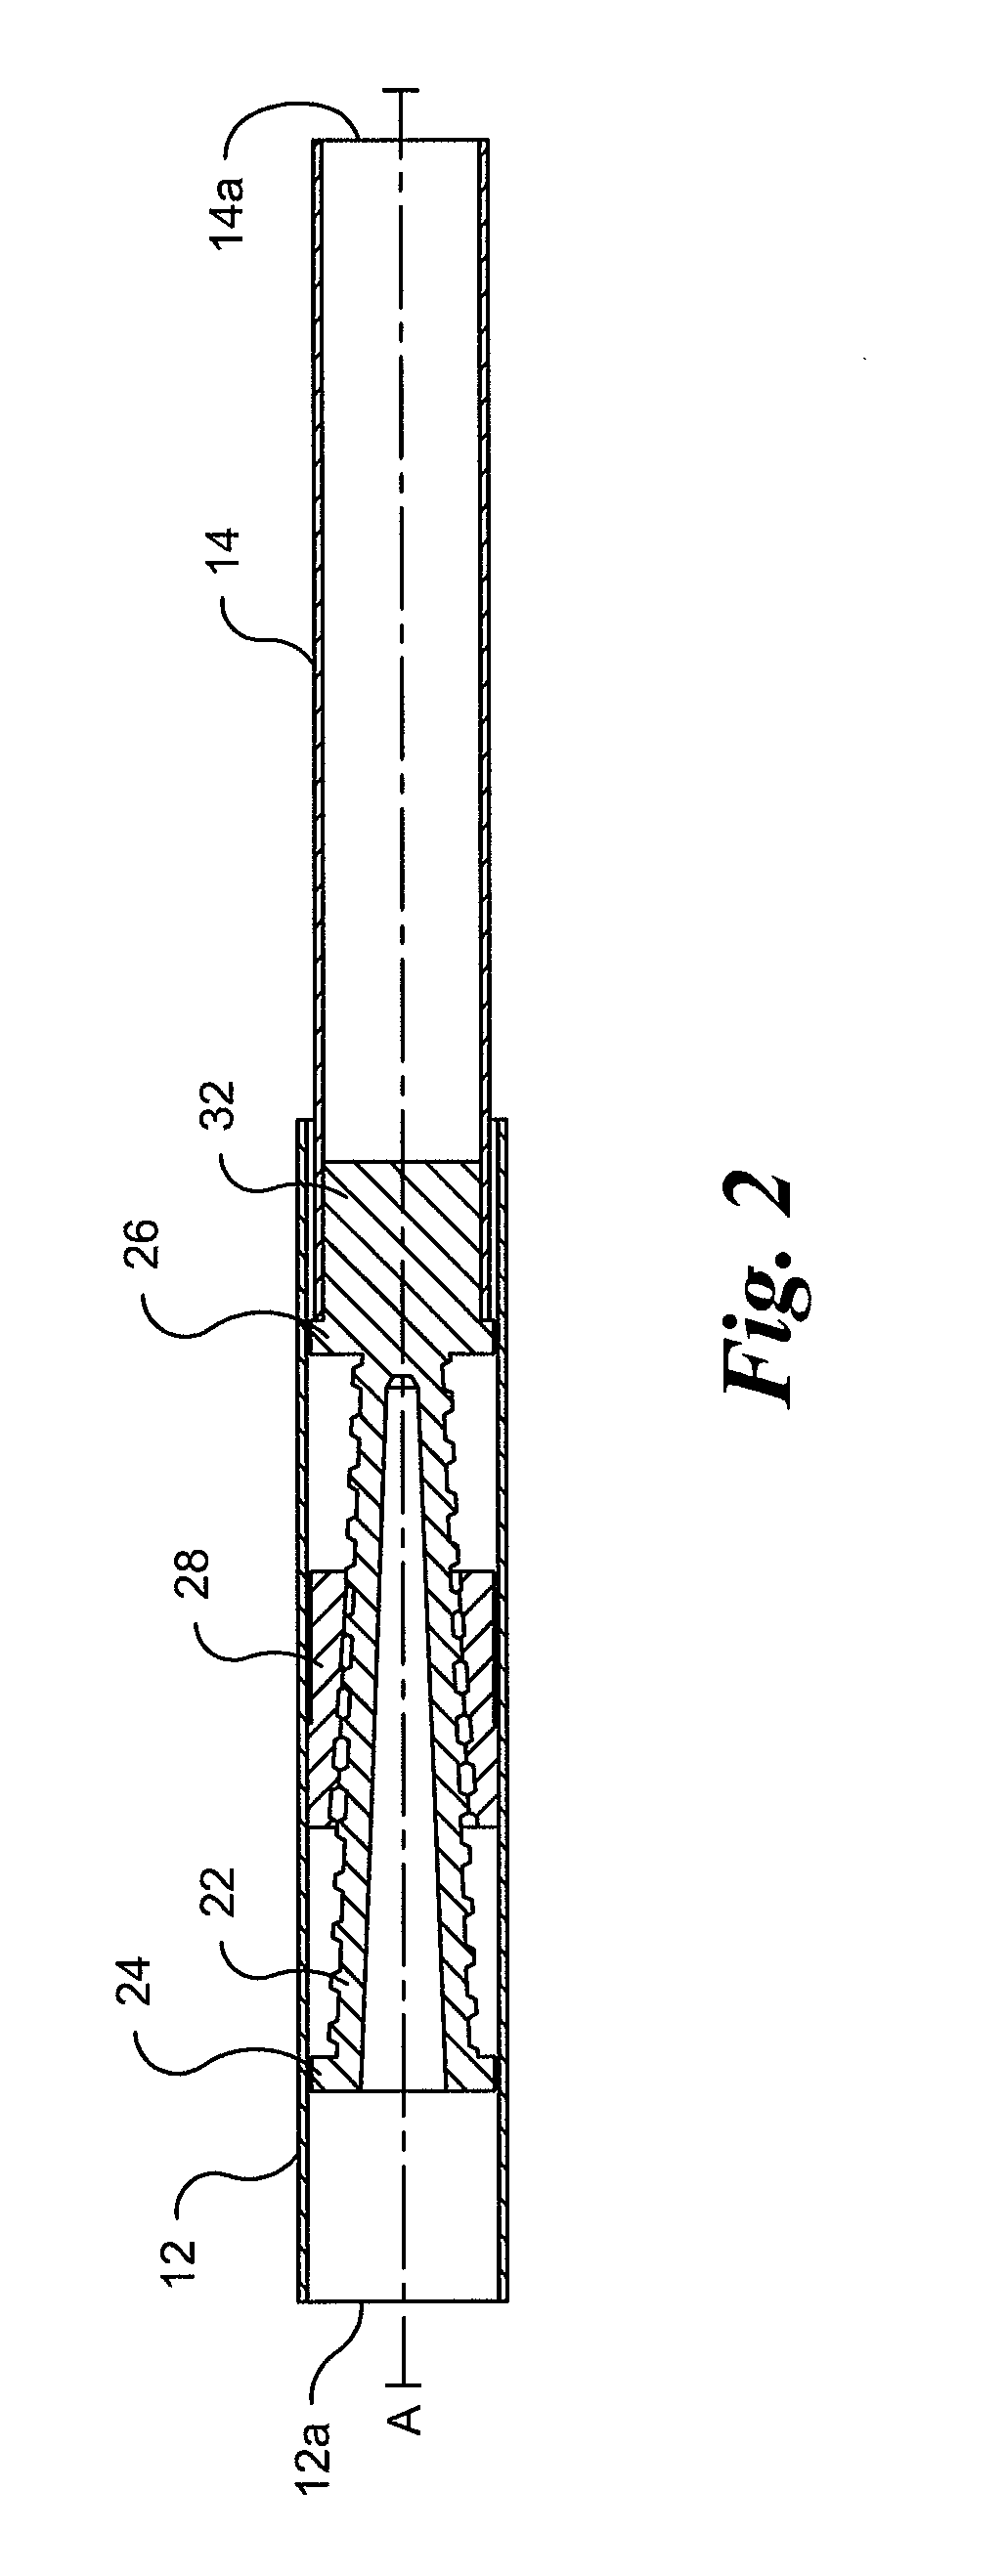 Molded tension rod mechanism with single lock nut